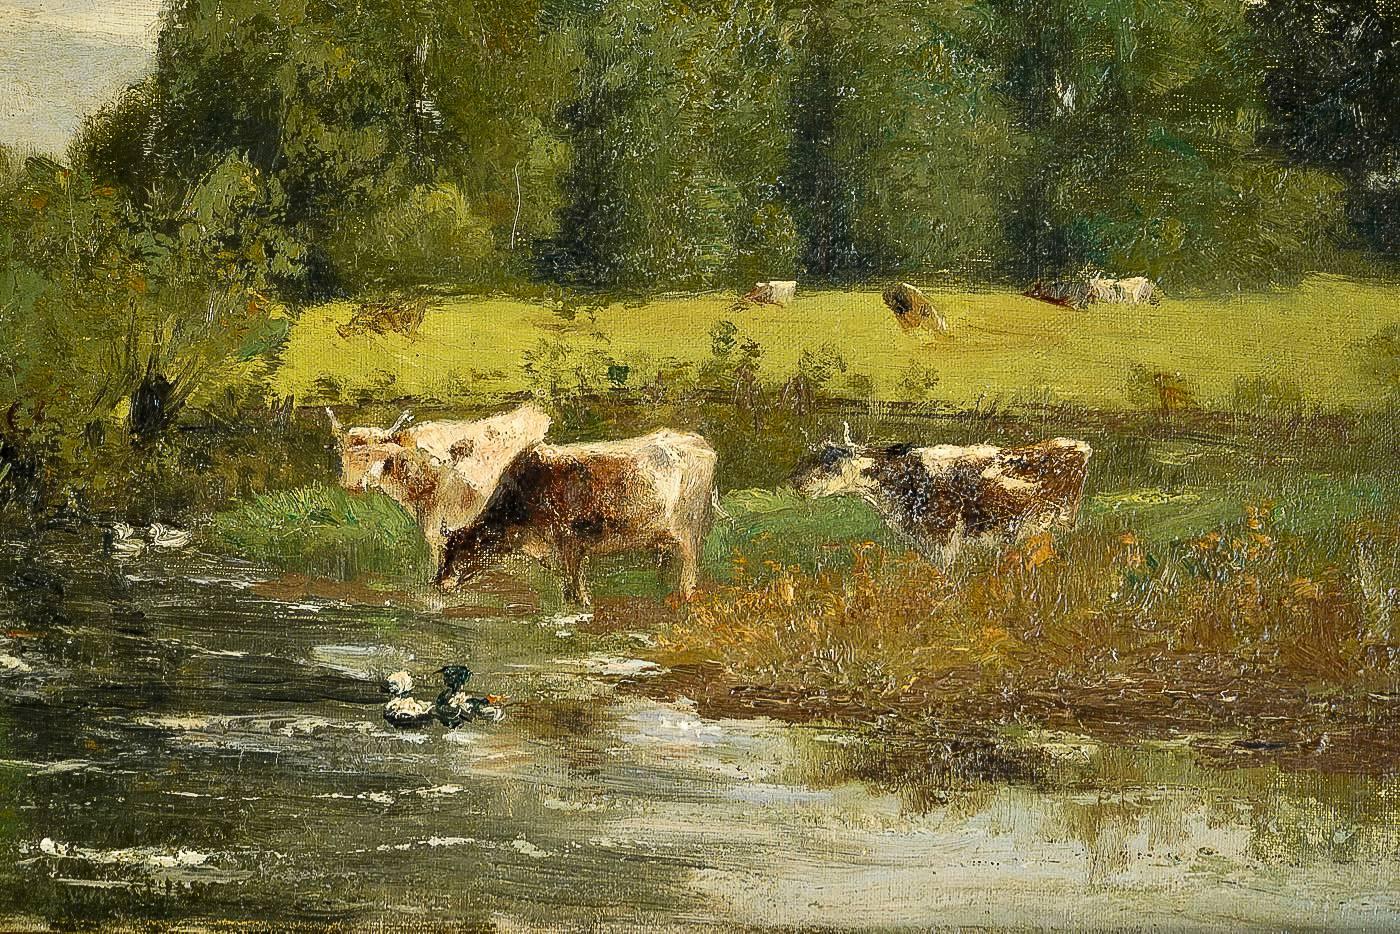 Paint Brielman Jacques Alfred, Old Mill by a River, Oil on Canvas, circa 1860-1870